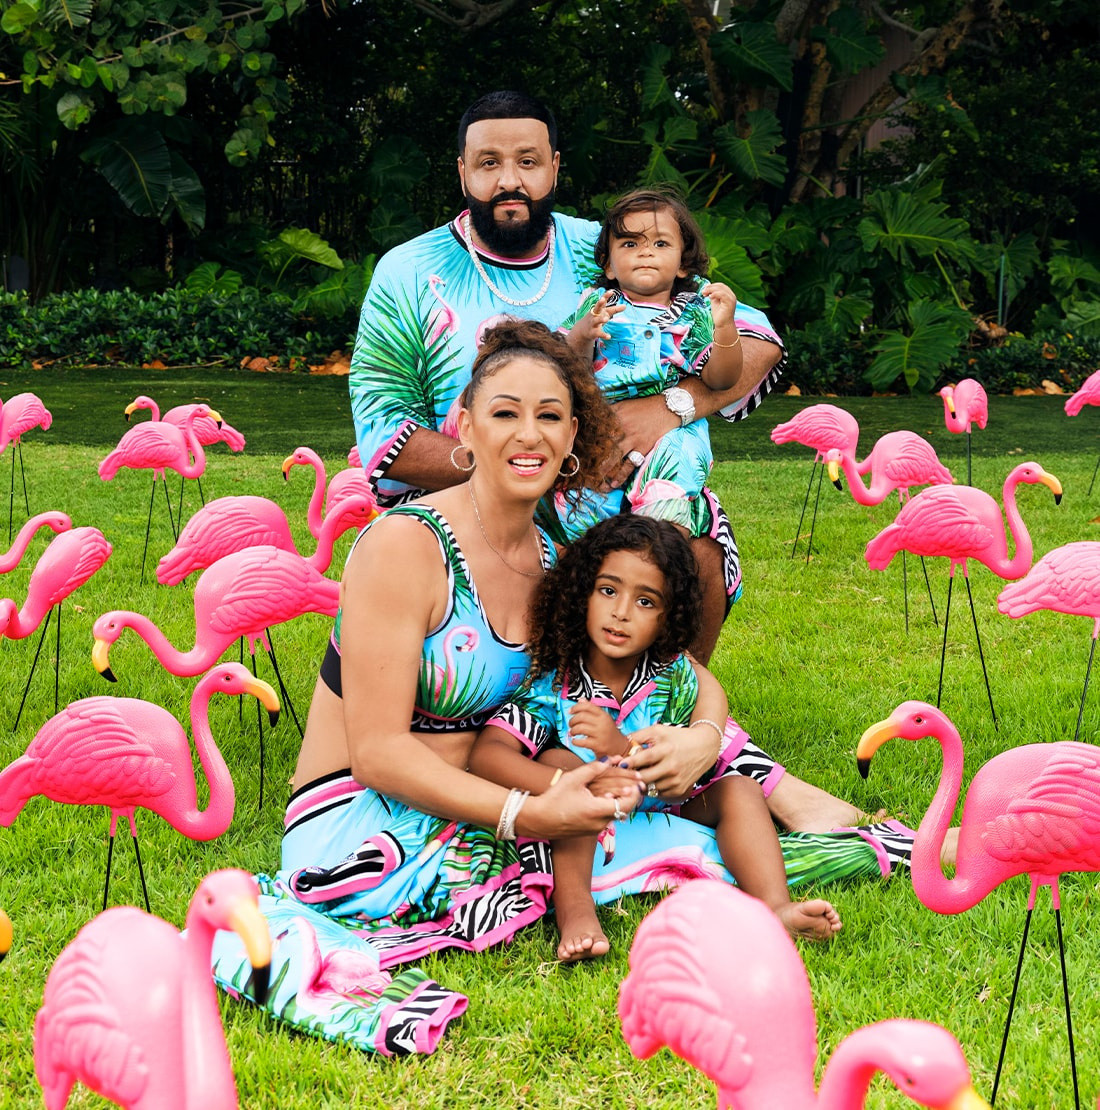 DJ Khaled and Dolce & Gabbana are ready for summer with a lot of flamingoes